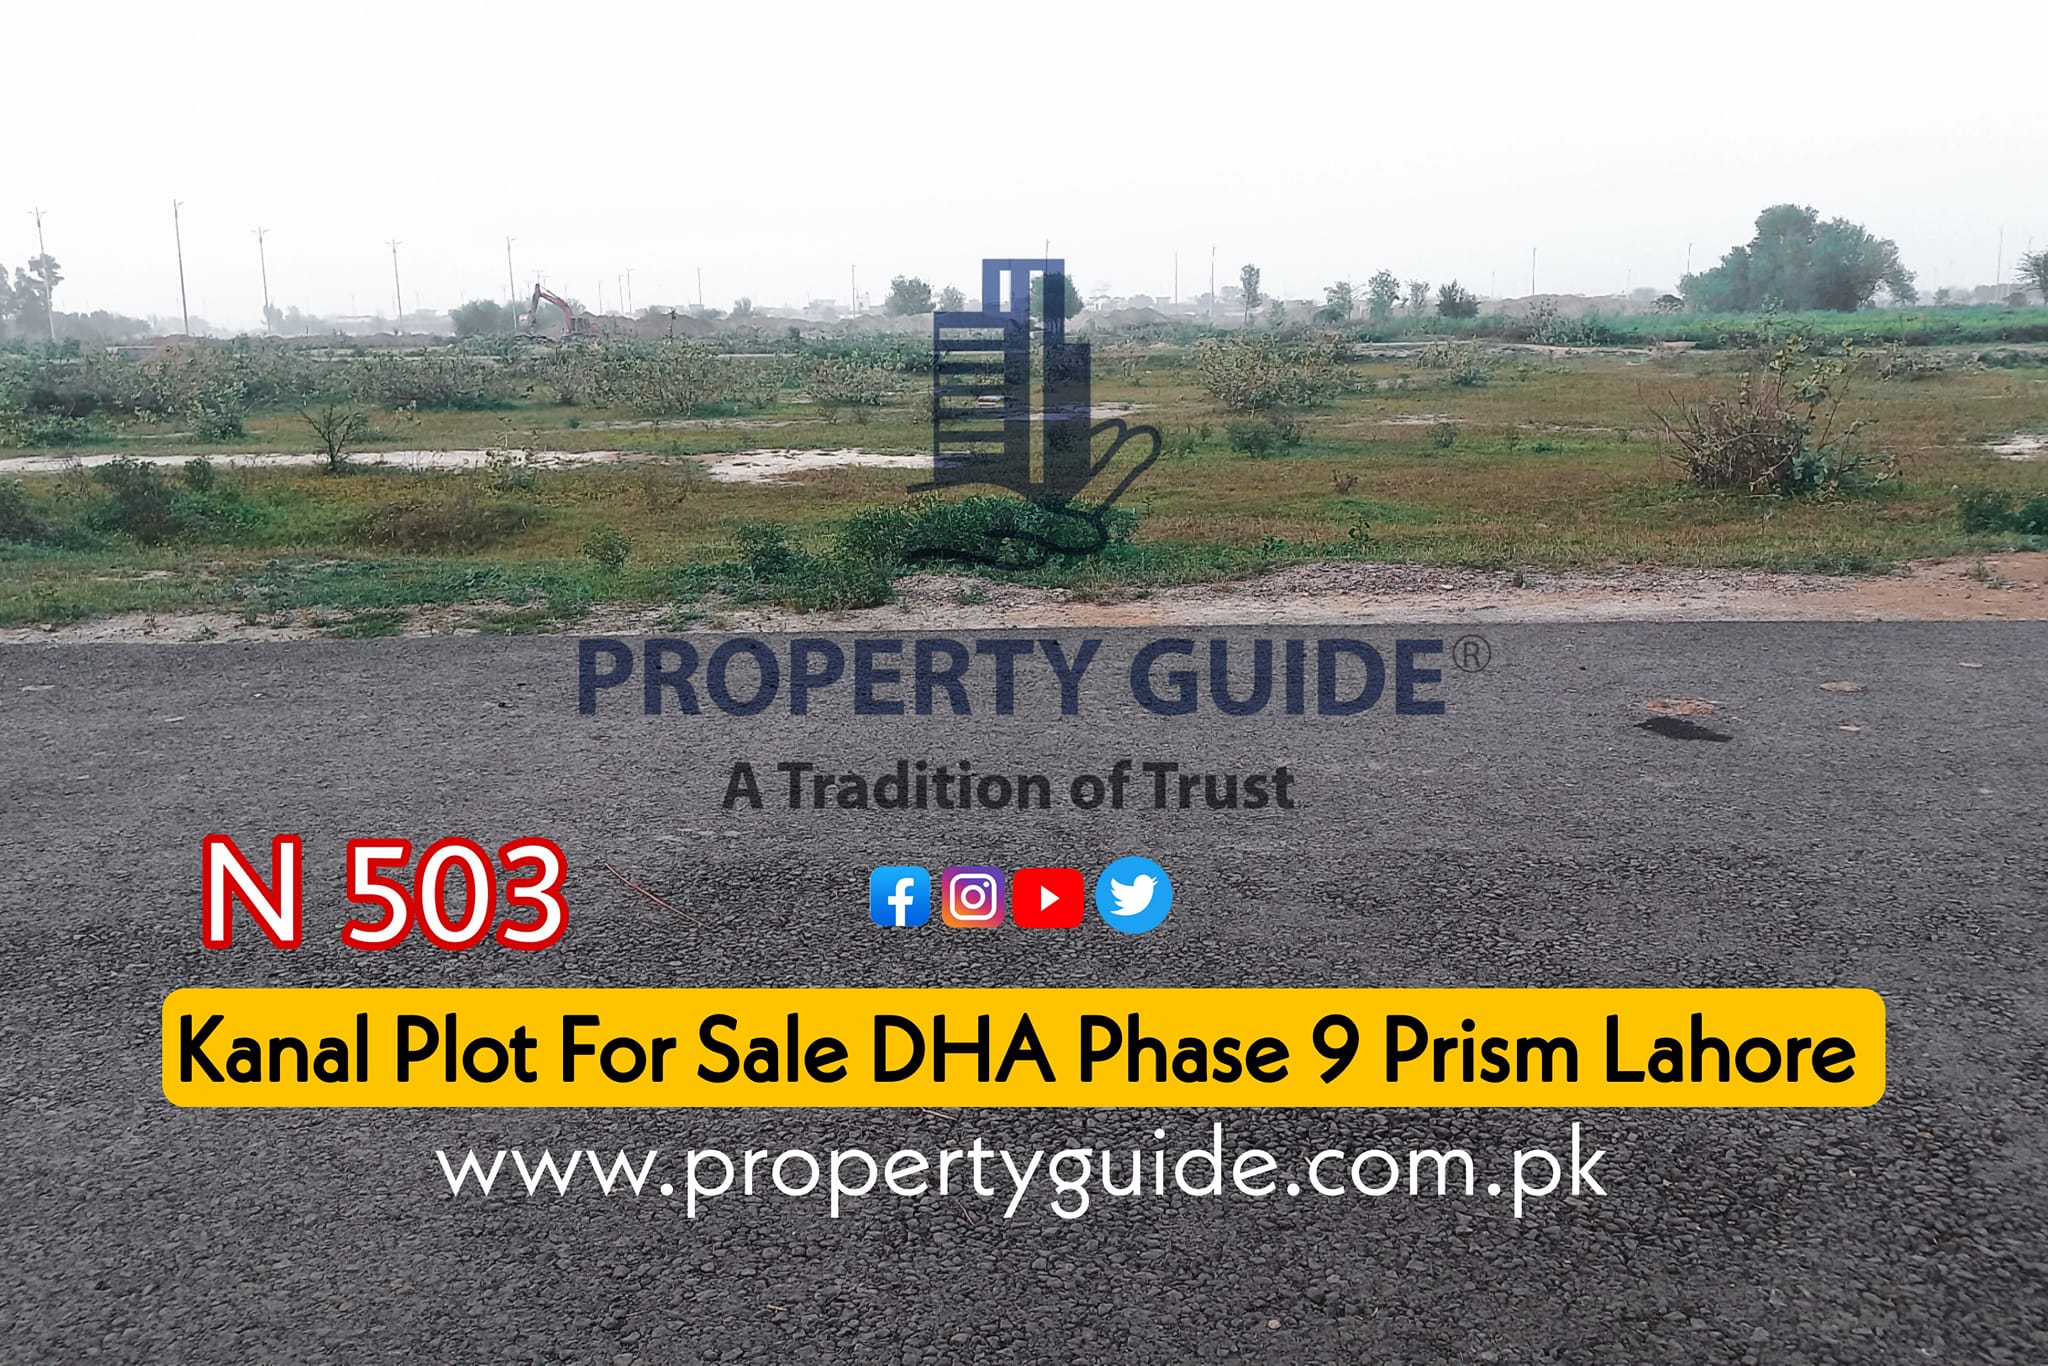 01 Kanal Plot For Sale In DHA Phase 9 Prism Lahore